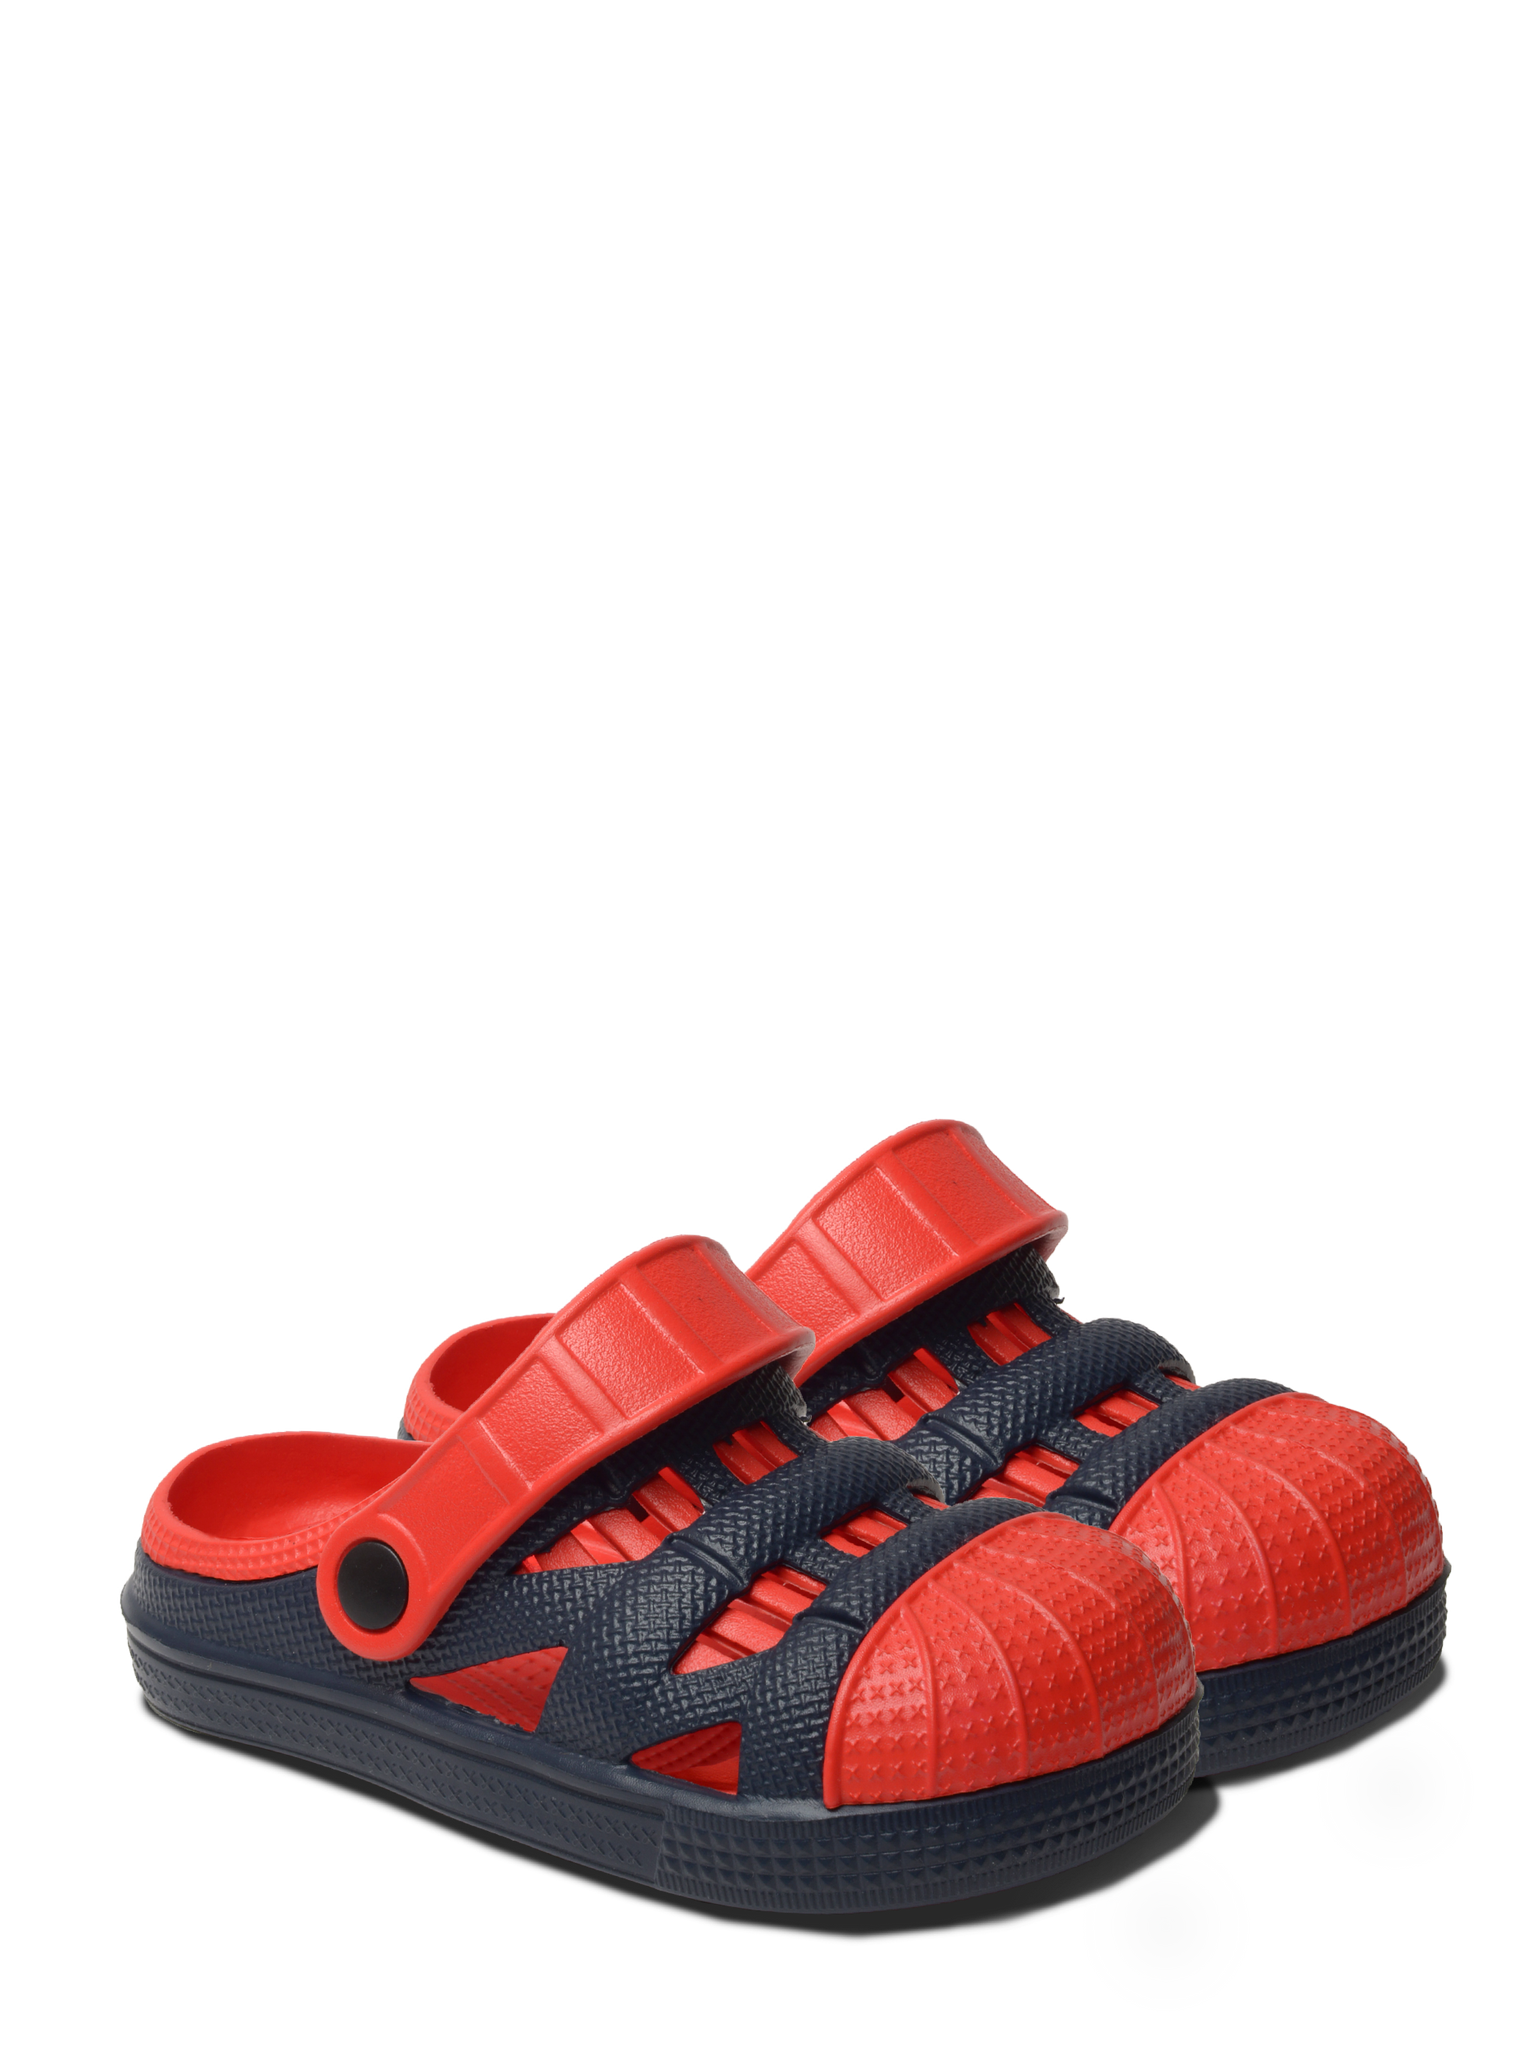 Kids Lightweight Sandals - Navy/Red (size 27 & 28 only)